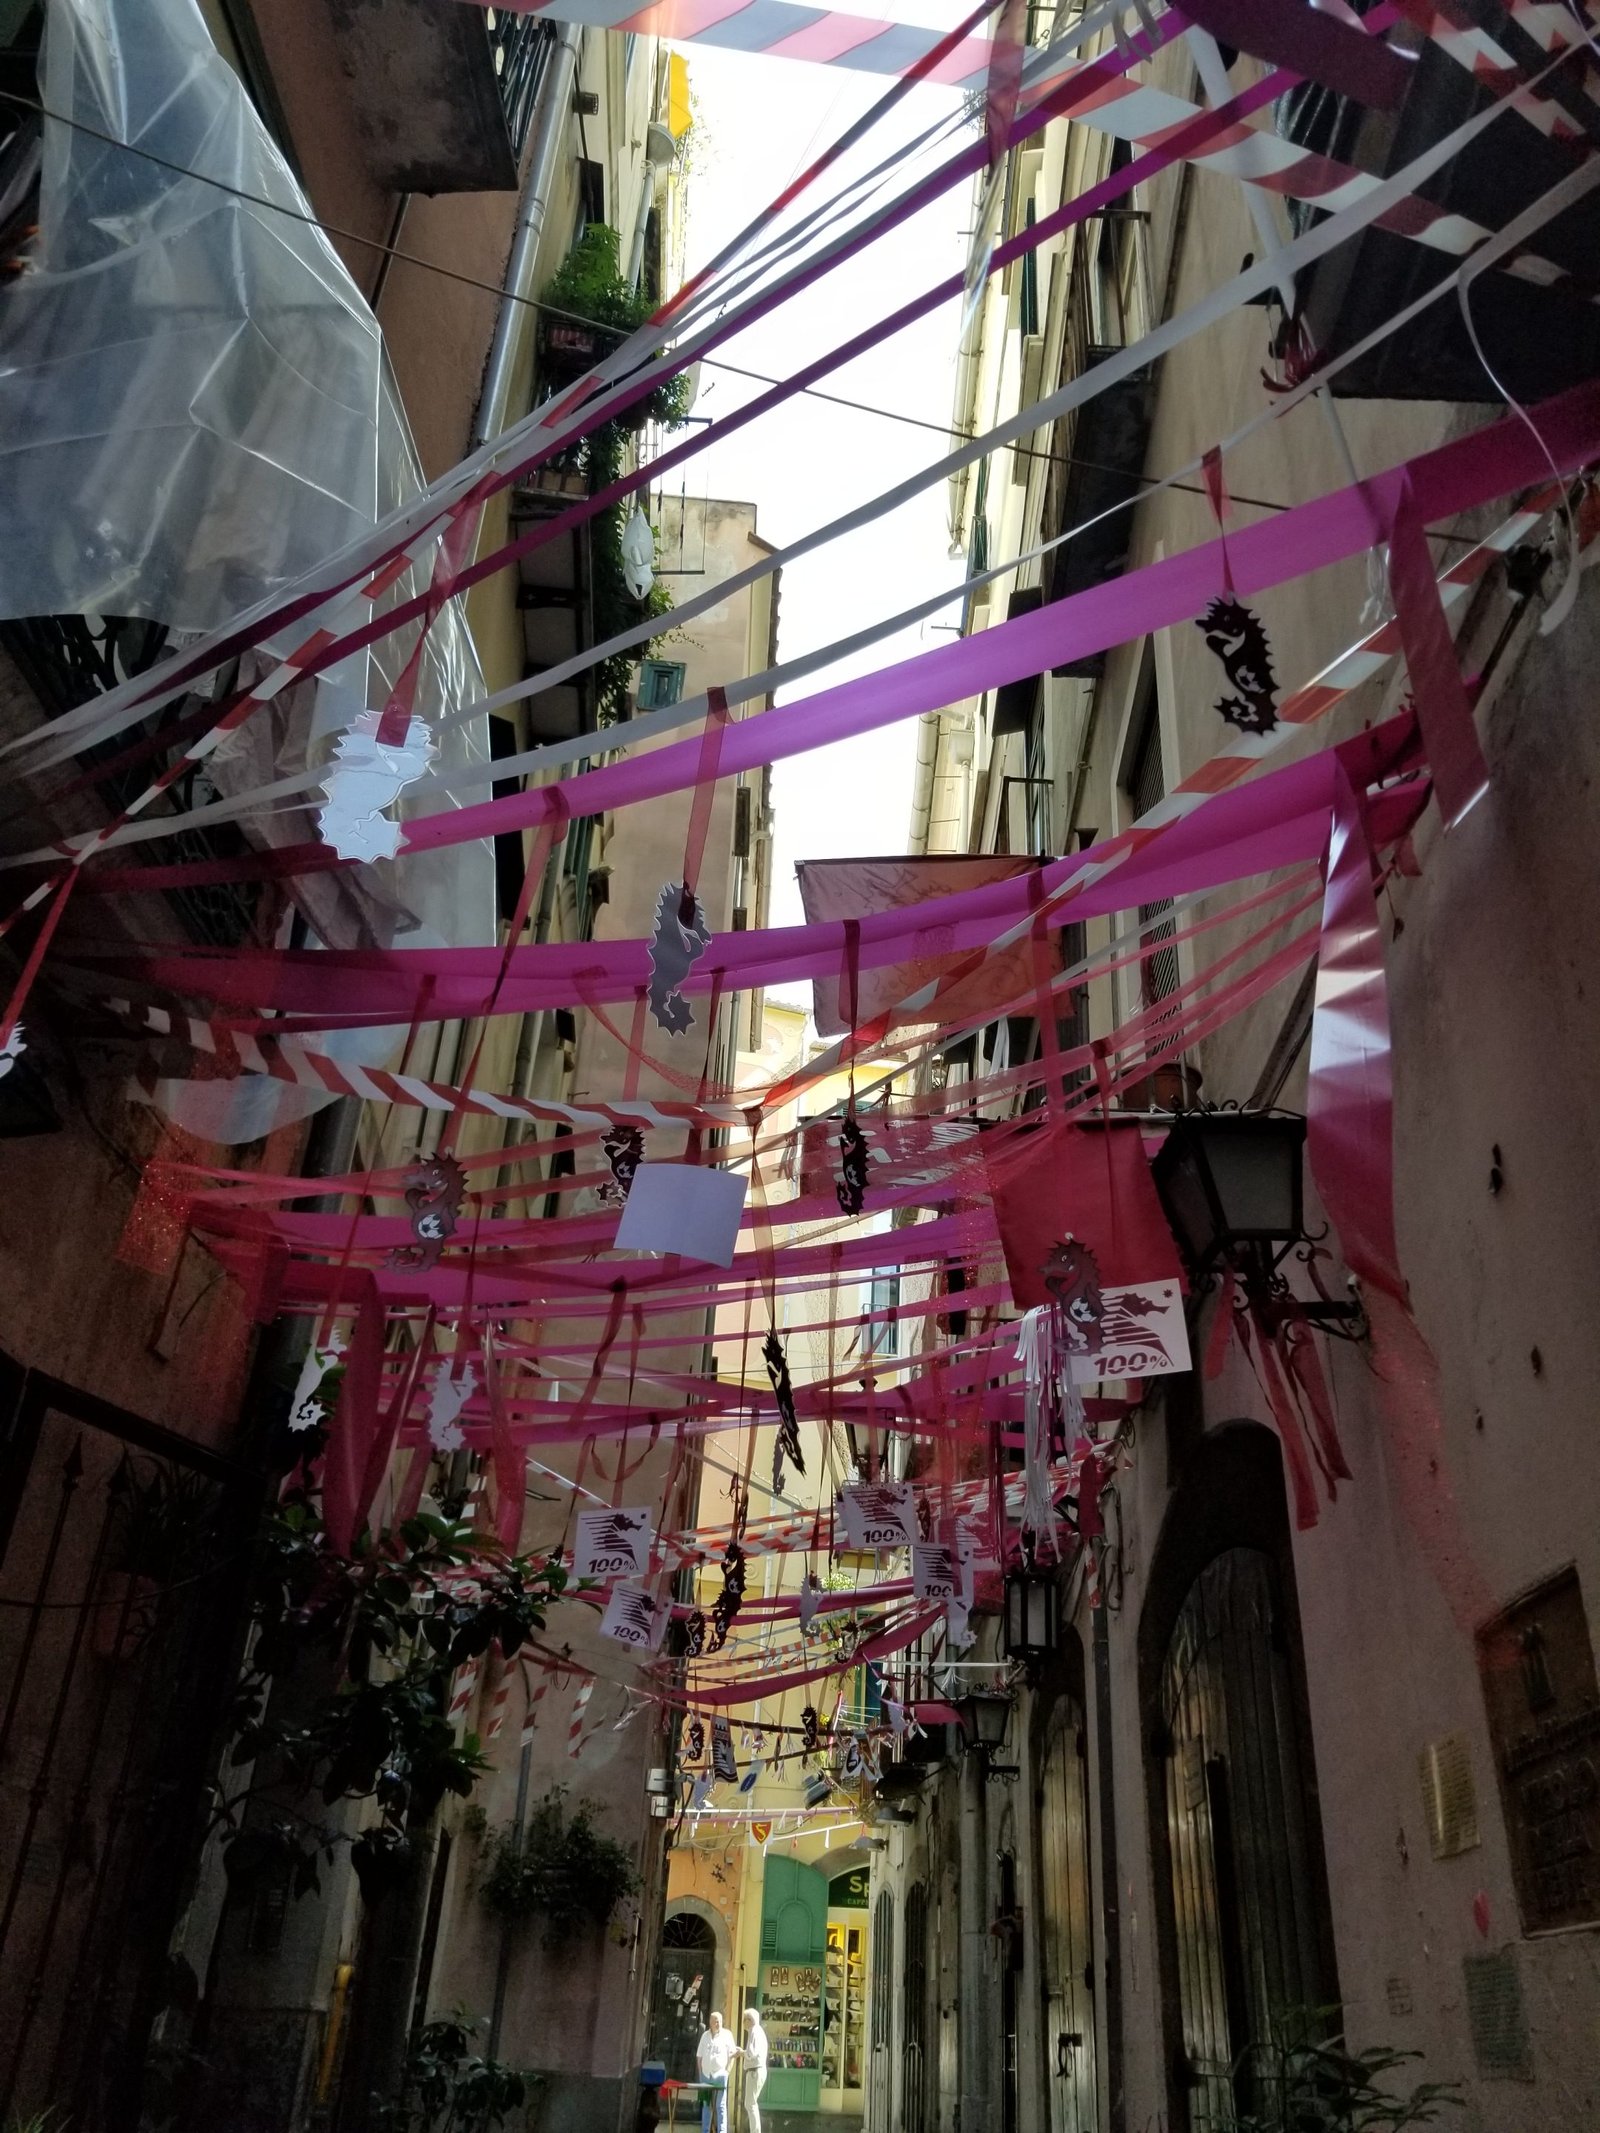 Months 7&8, our one year adventure through Italy. Highlights from months 7 & 8, ouritalianjourney.com, https://ouritalianjourney.com/months-7-8-1-year-adventure-in-italy